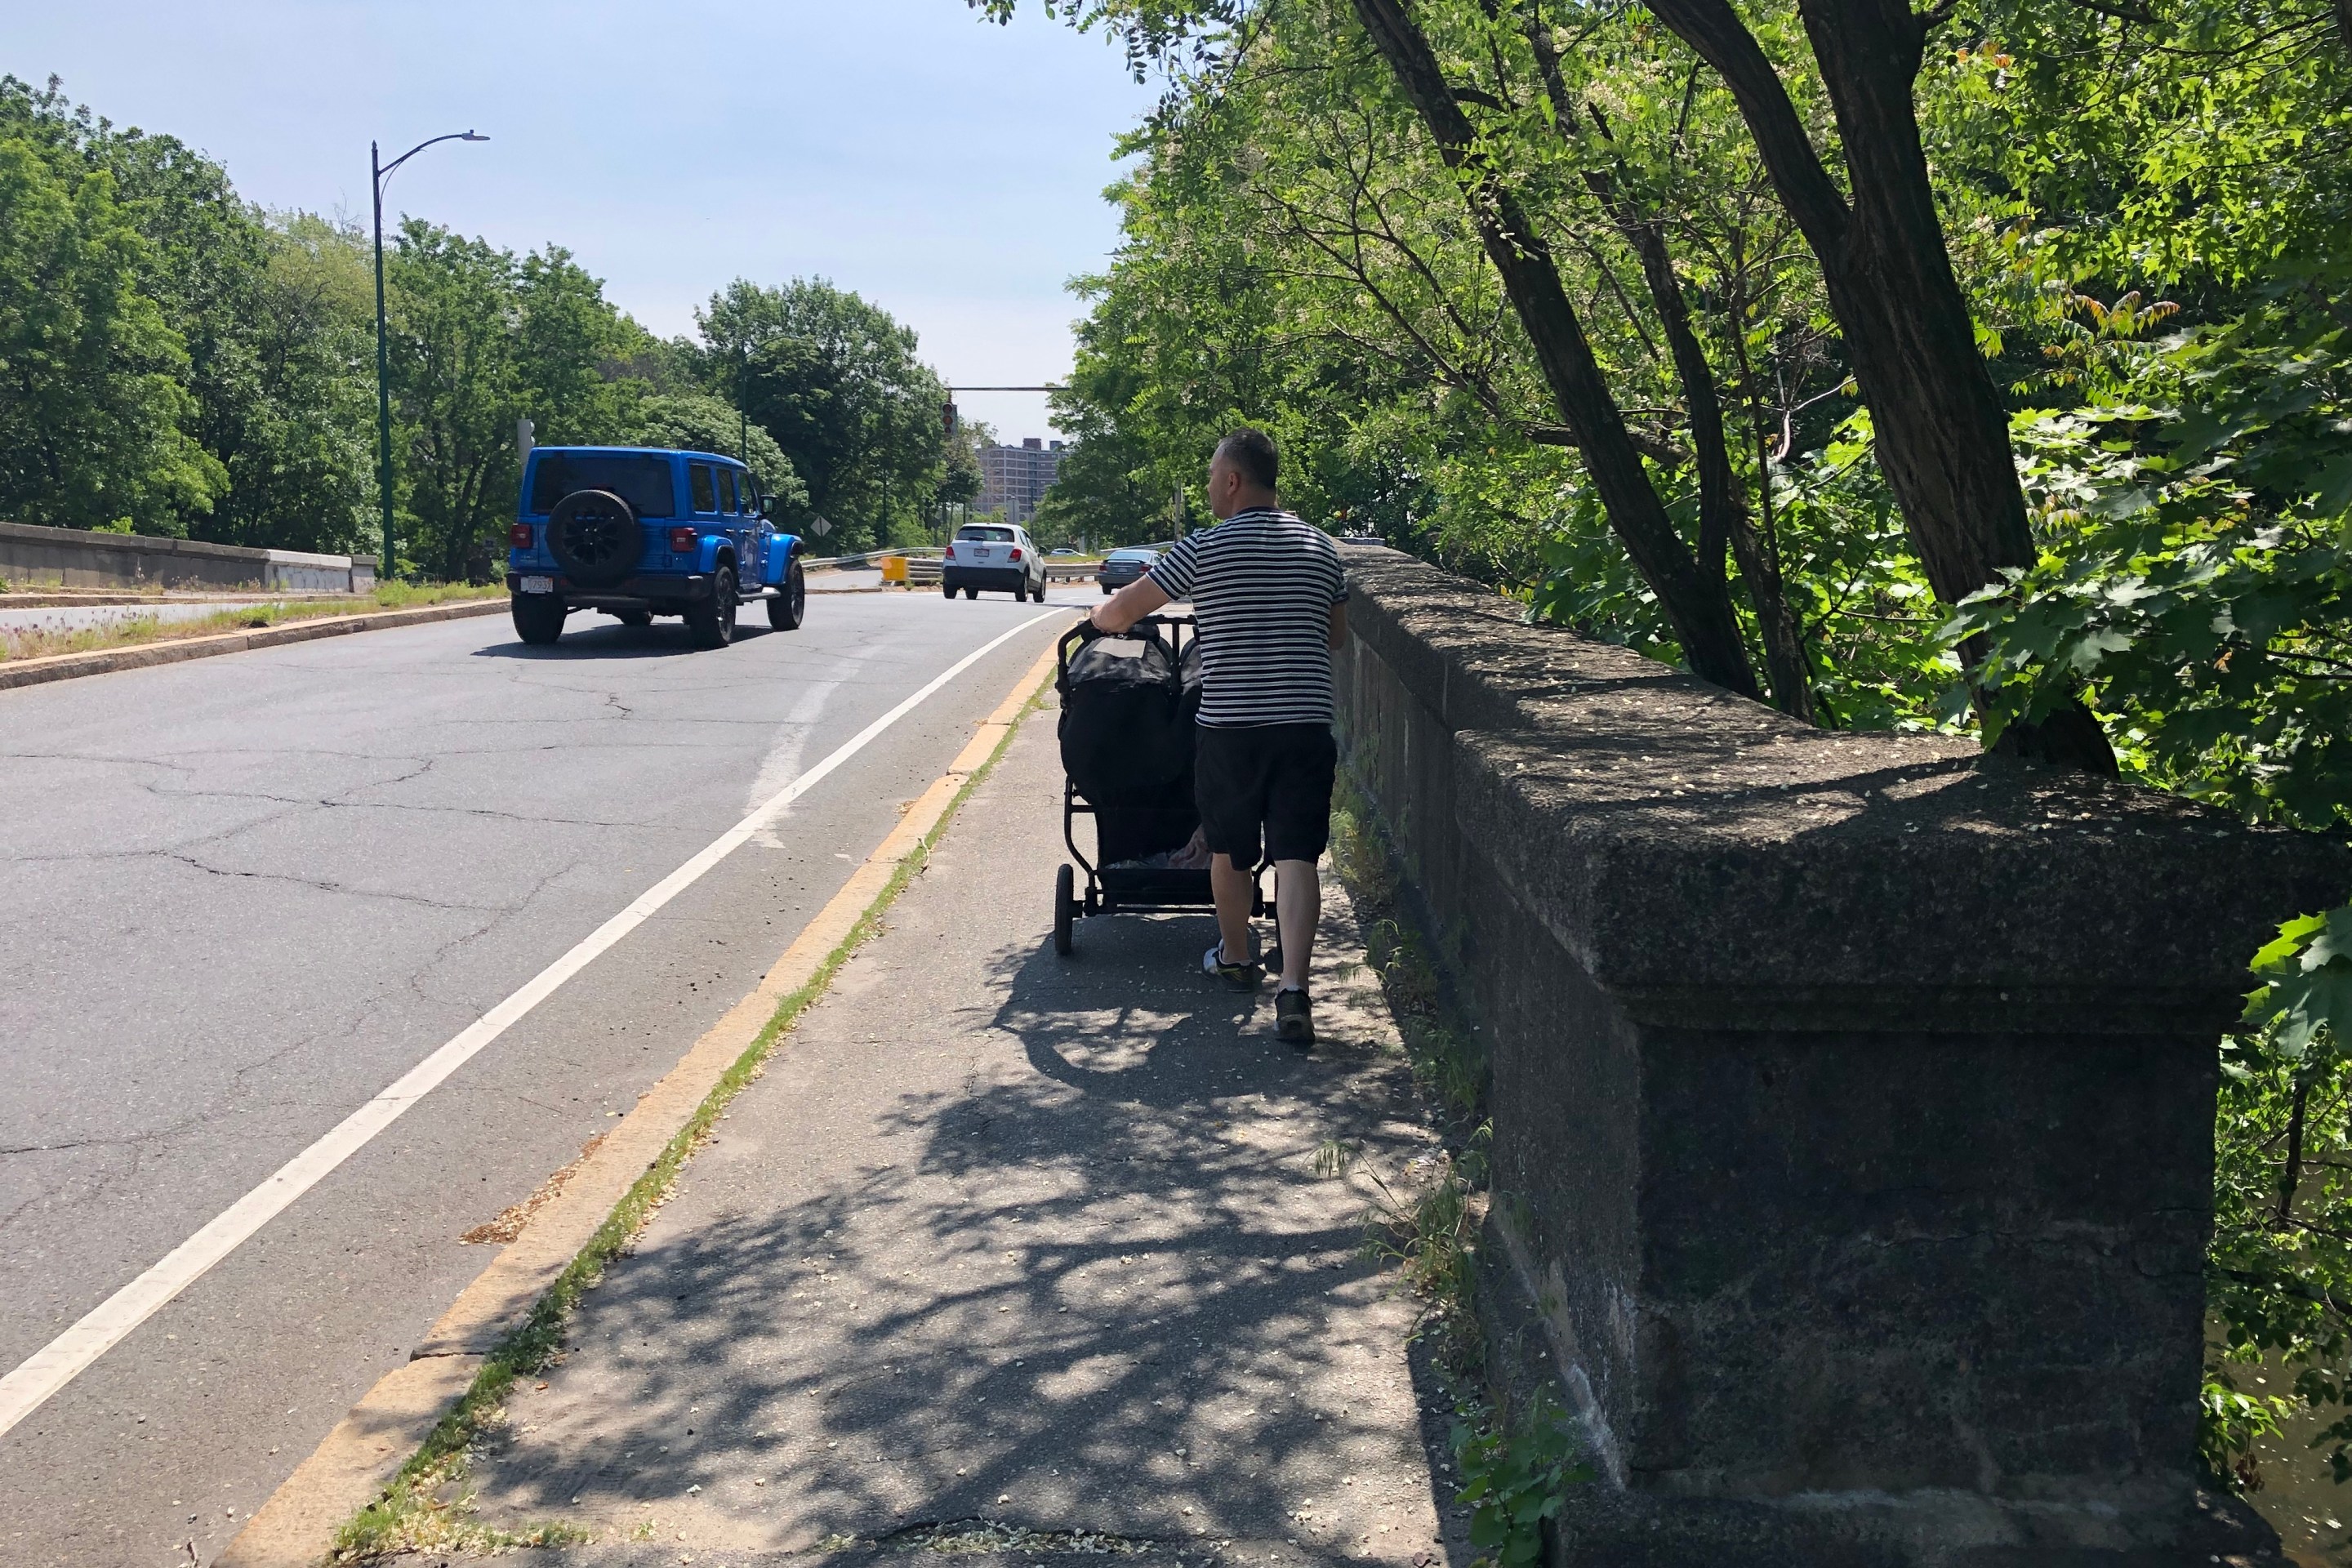 A man pushing a stroller along a narrow sidewalk on a bridge with an old stone masonry railing. Next to him is a wide asphalt highway lane where a large blue pickup truck is driving. In the distance is a brick-clad apartment tower peeking above leafy trees.